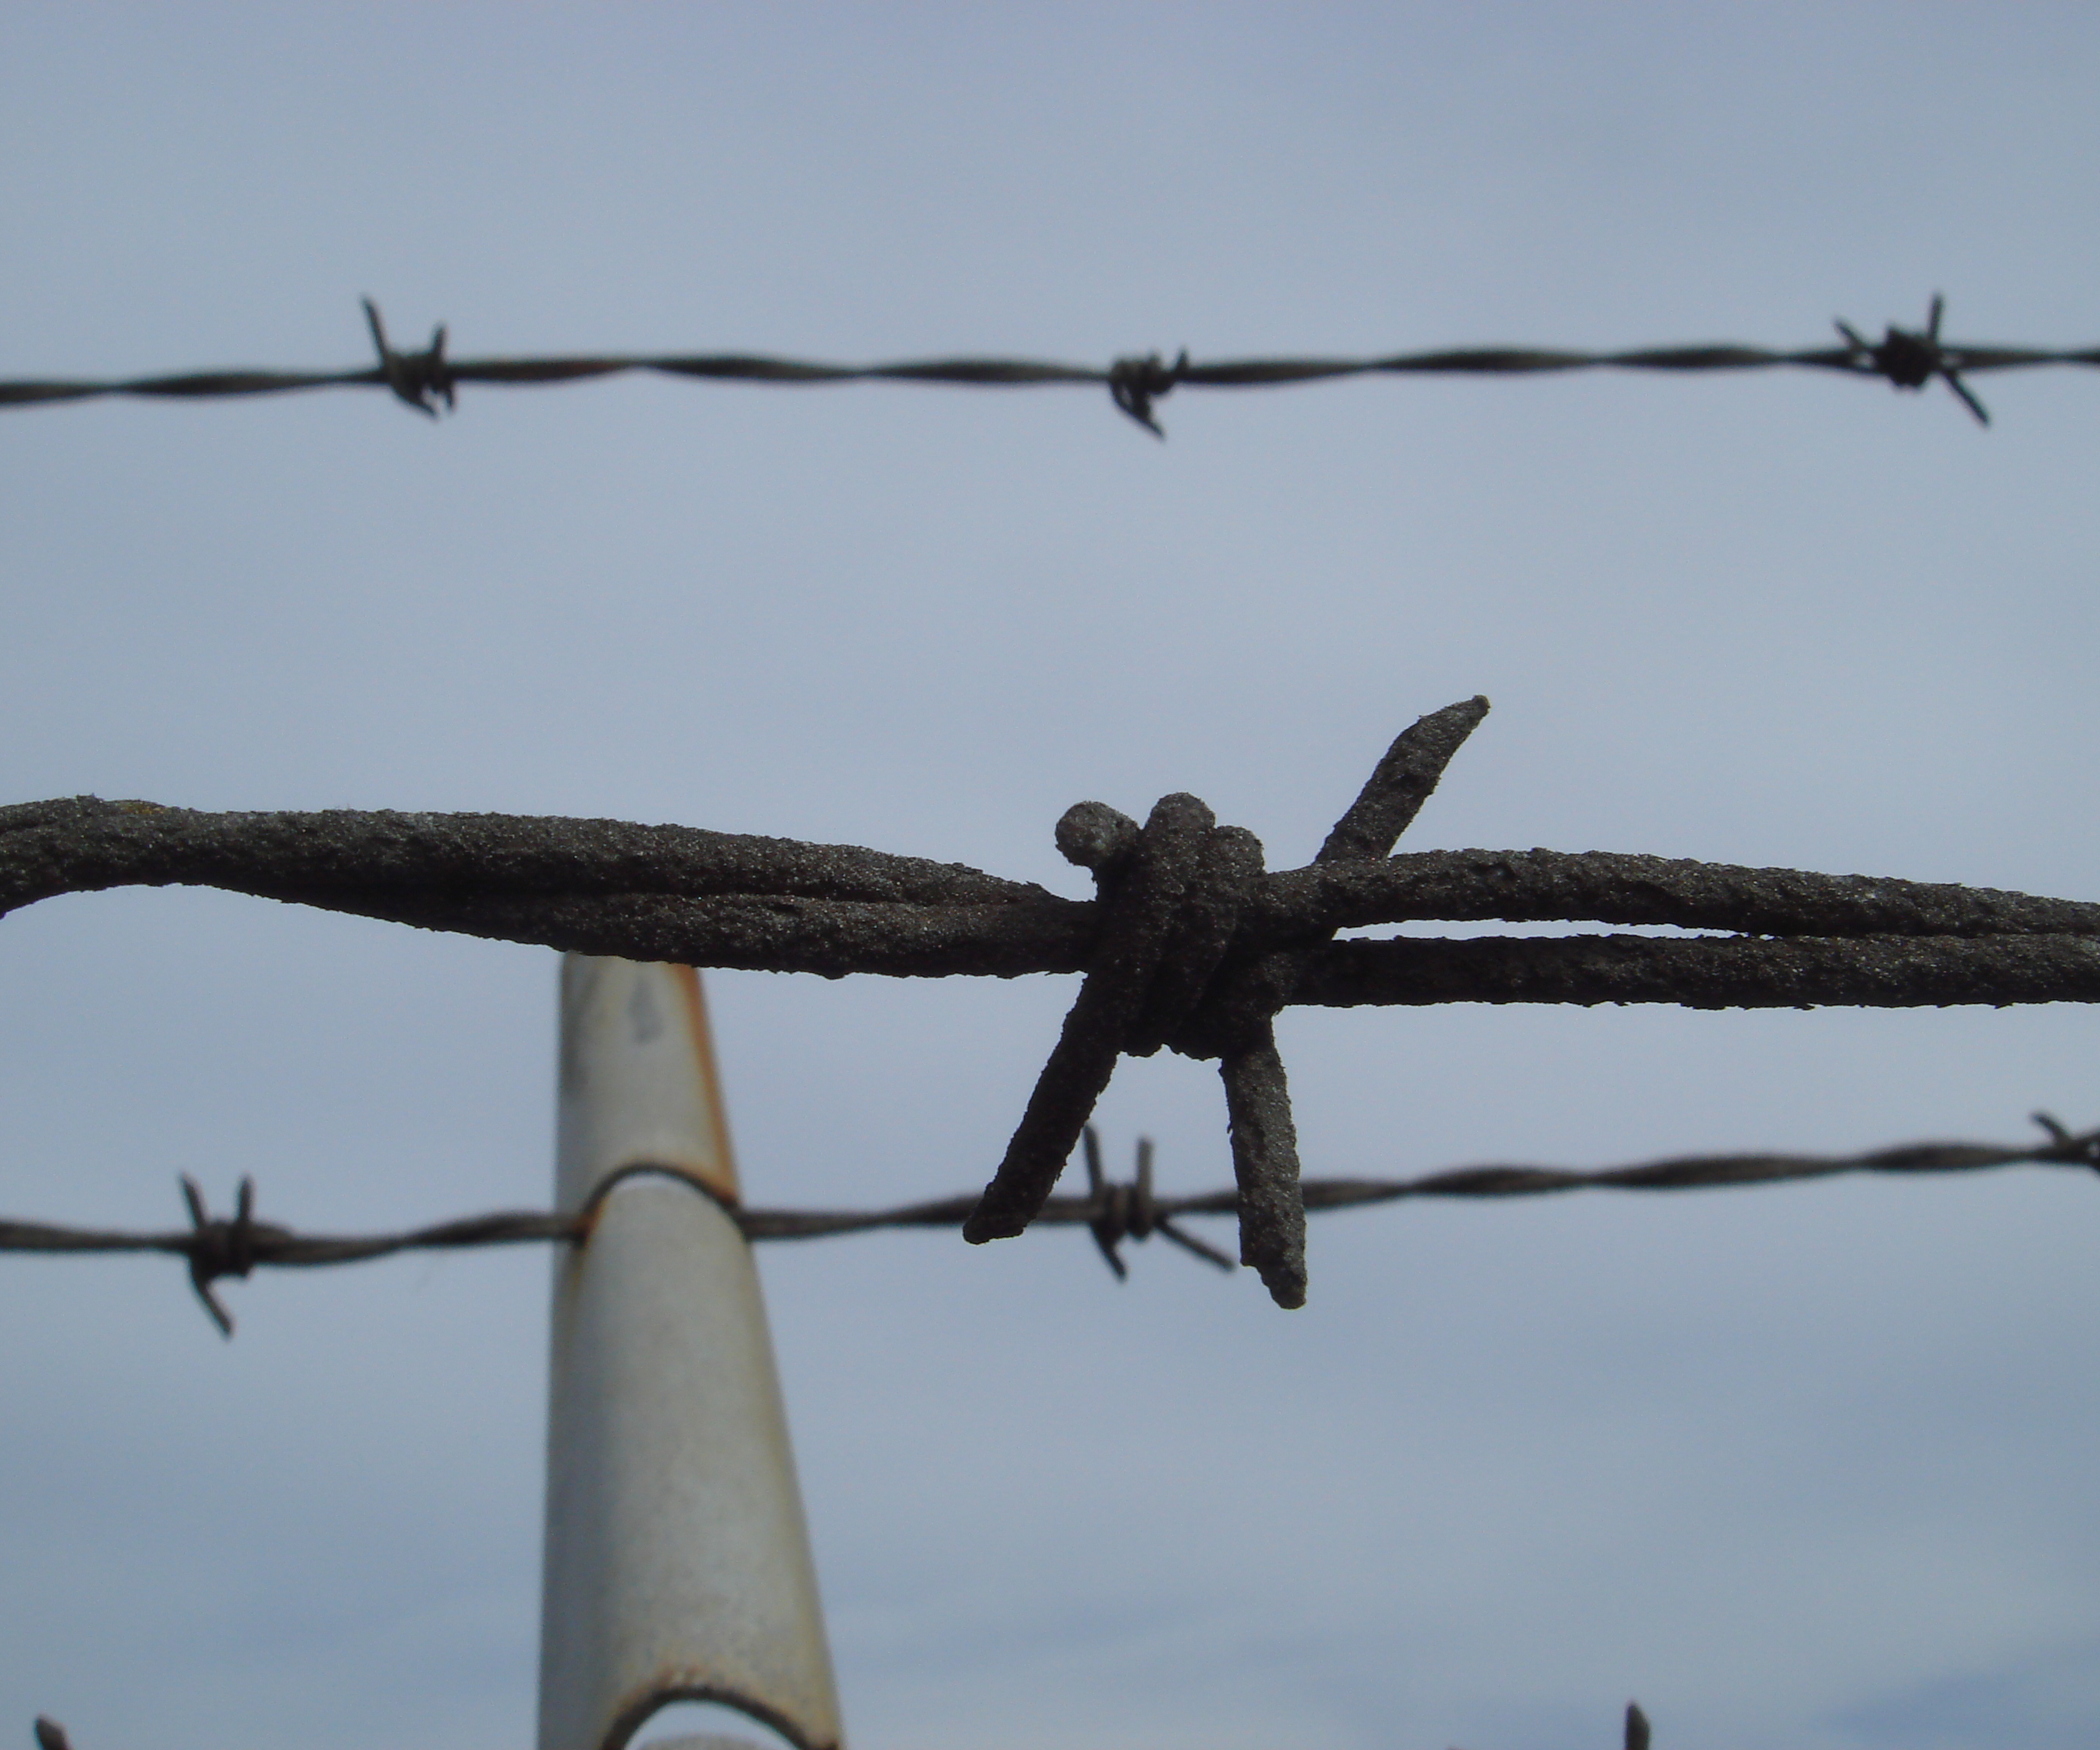 Get Over a Barbed Wire Fence